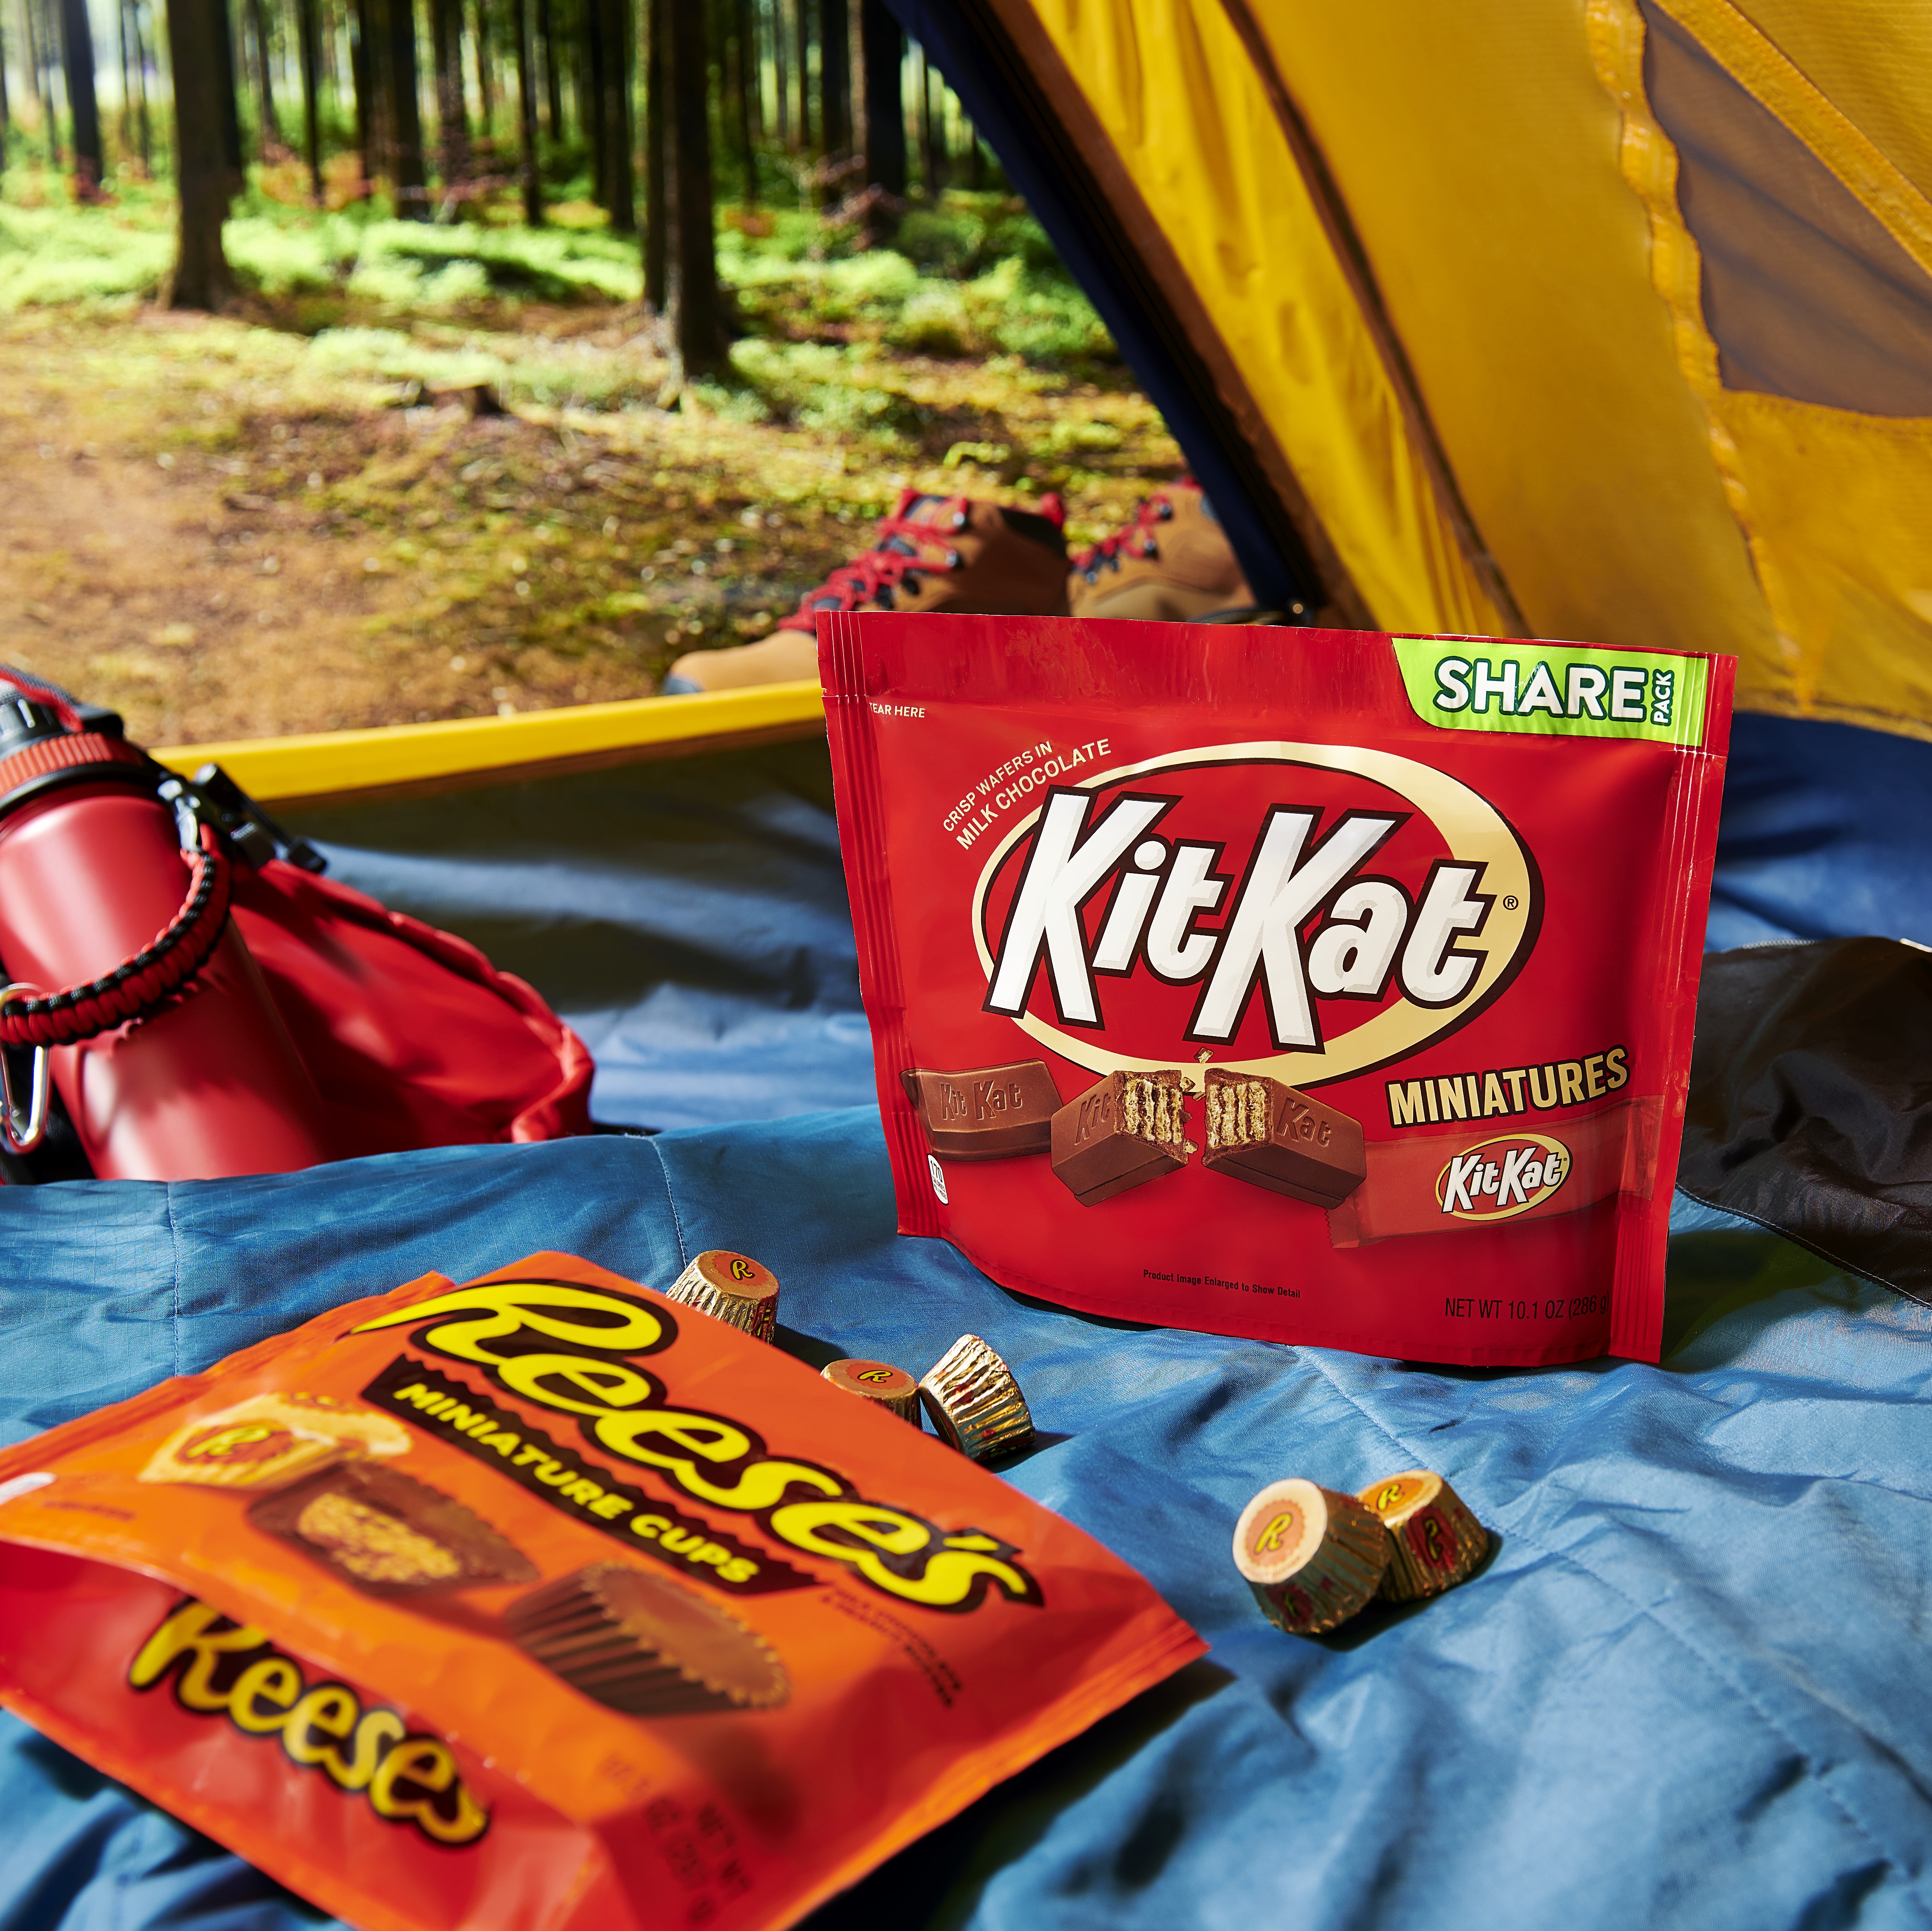 REESE'S and KIT KAT® share bags in a tent at a campground